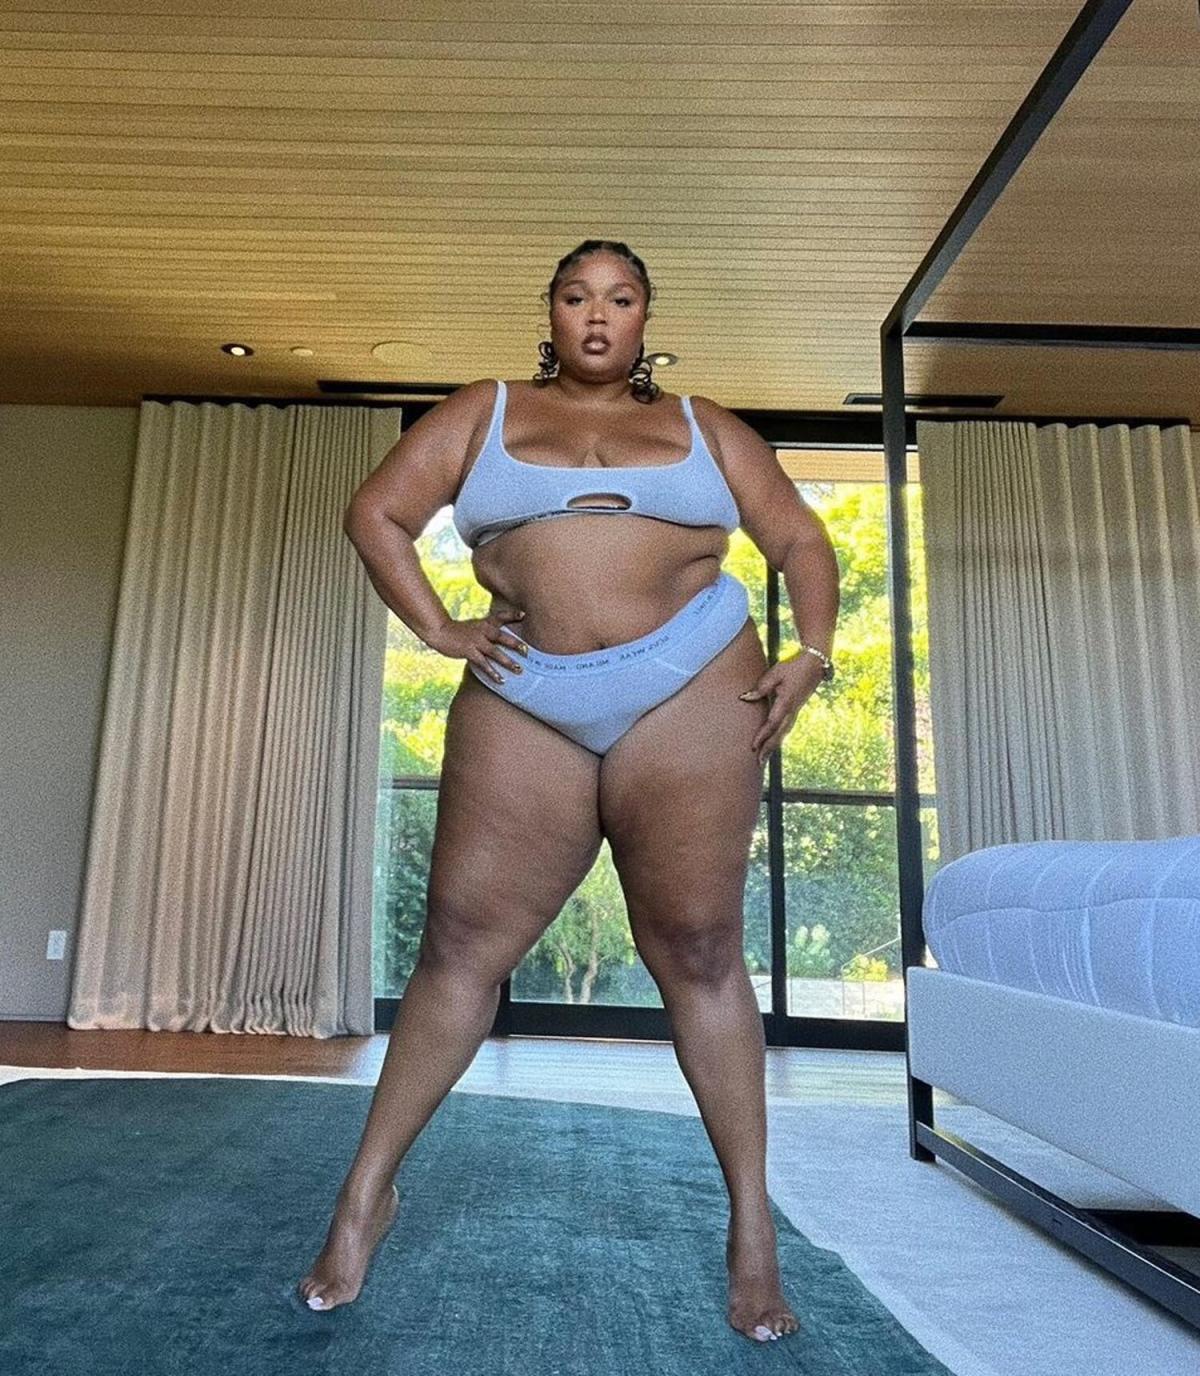 Lizzo shows off her curvaceous behind in a VERY revealing thong workout set